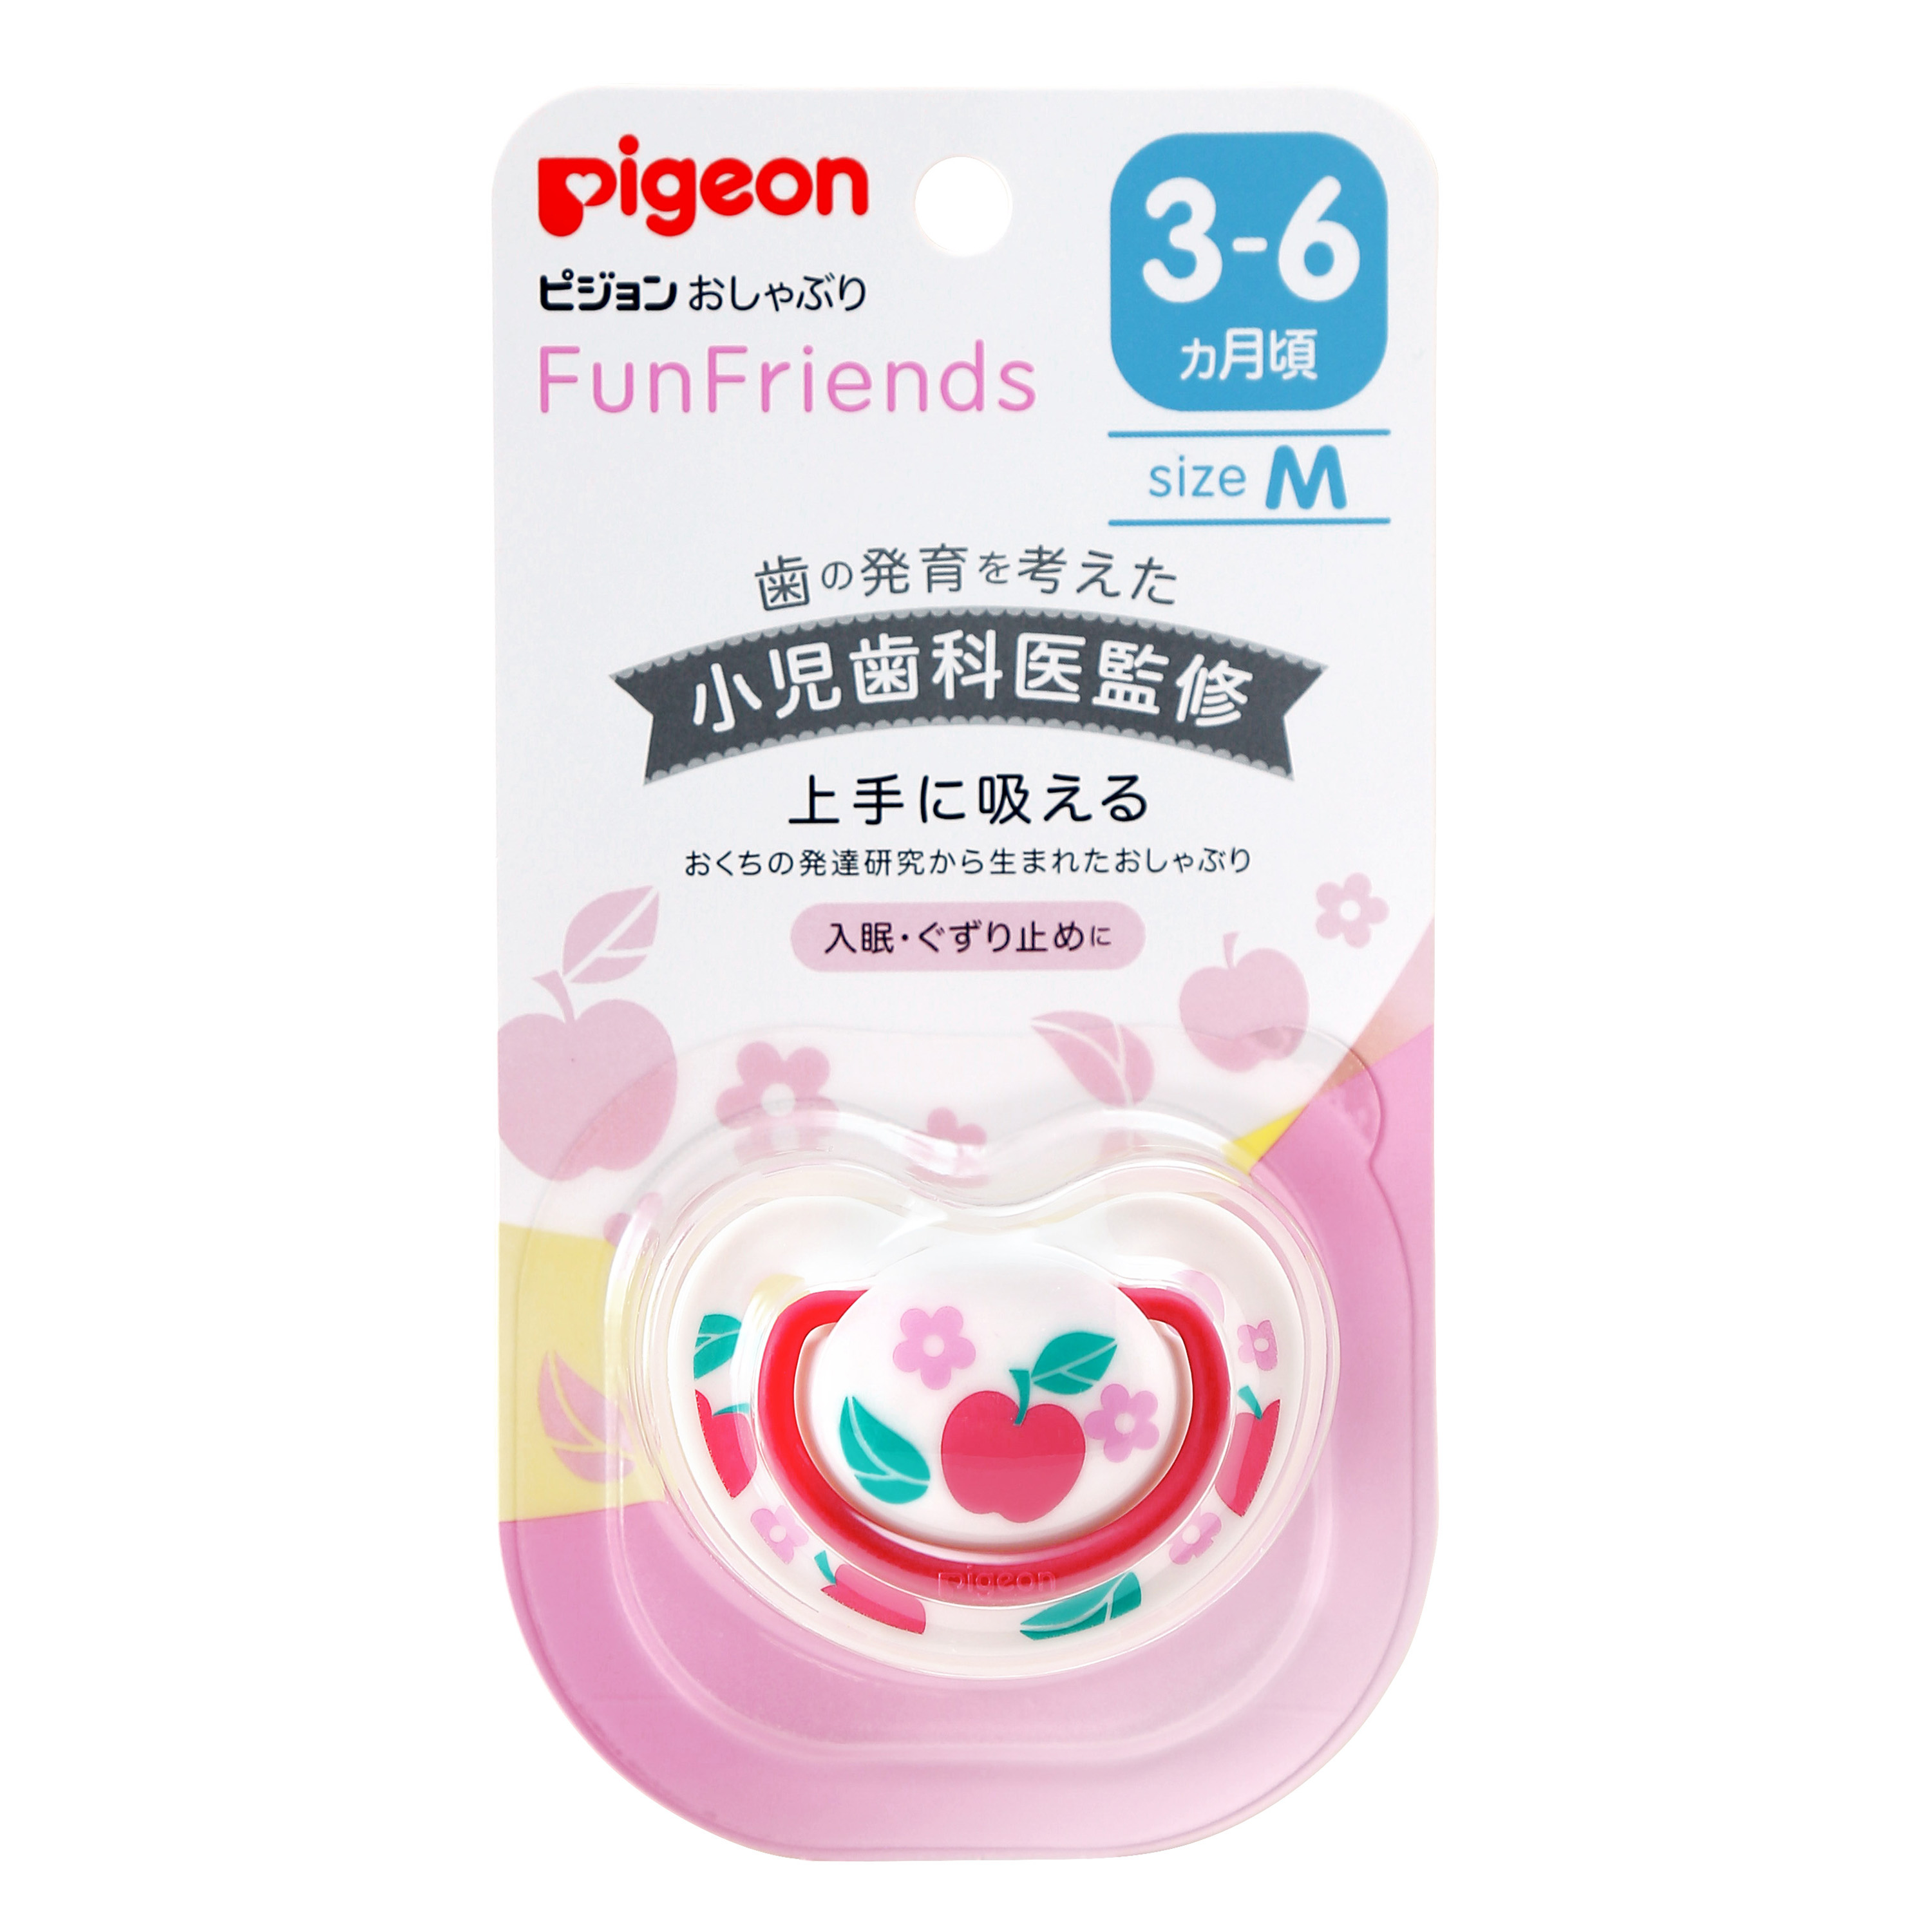 Pigeon Soother Funfriends M Size - Apple (JP) (PG-1018862)